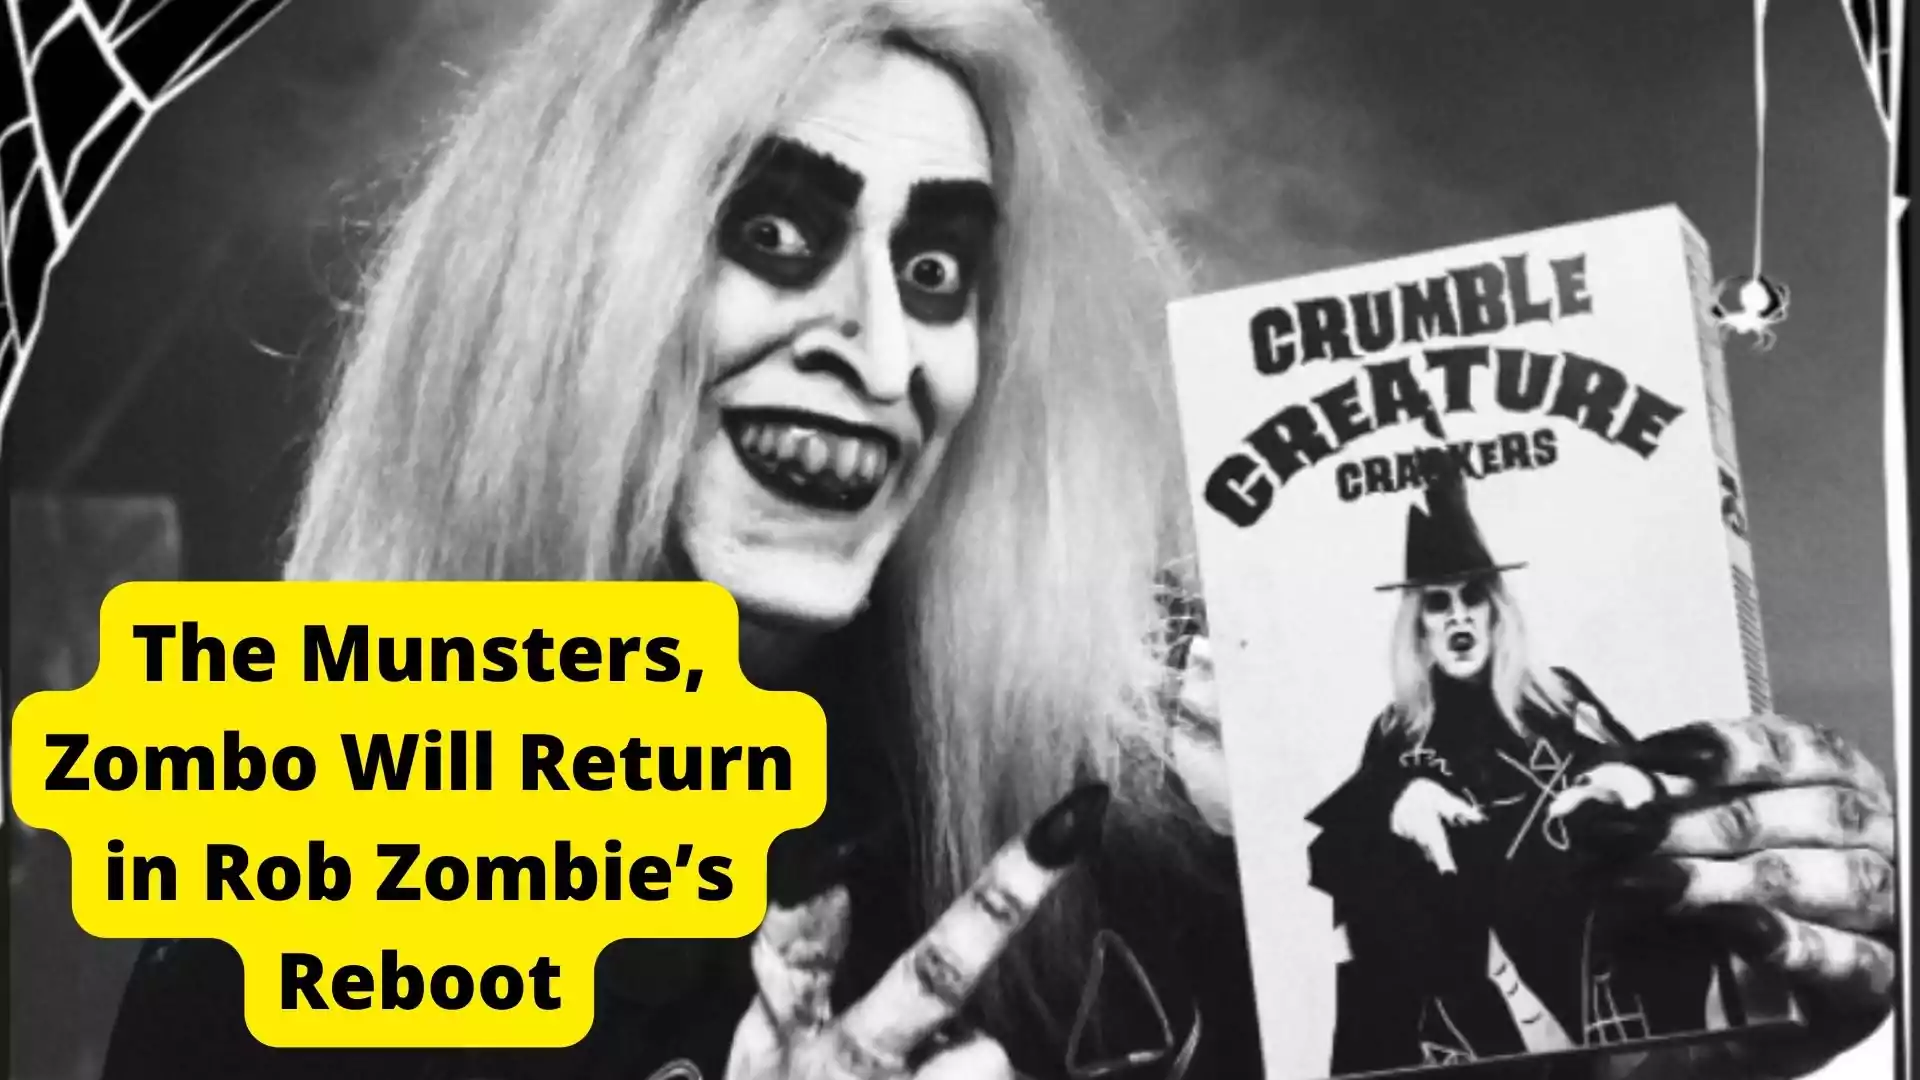 Your Favorite The Munsters character Zombo Will Return in Rob Zombie’s Reboot